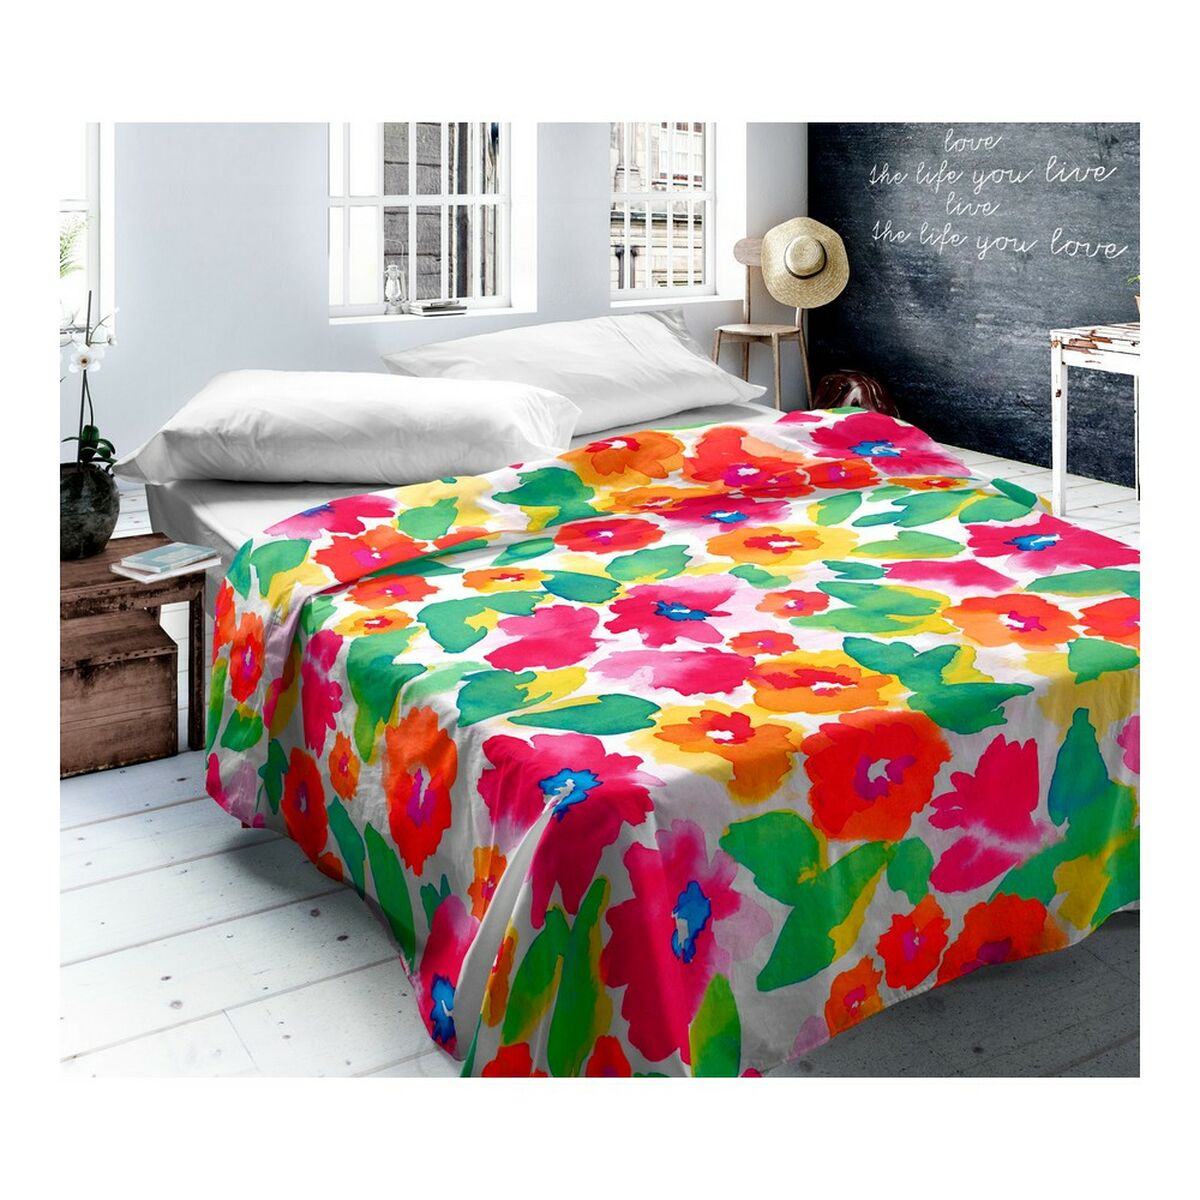 Top sheet Icehome Summer Day 180 x 270 cm